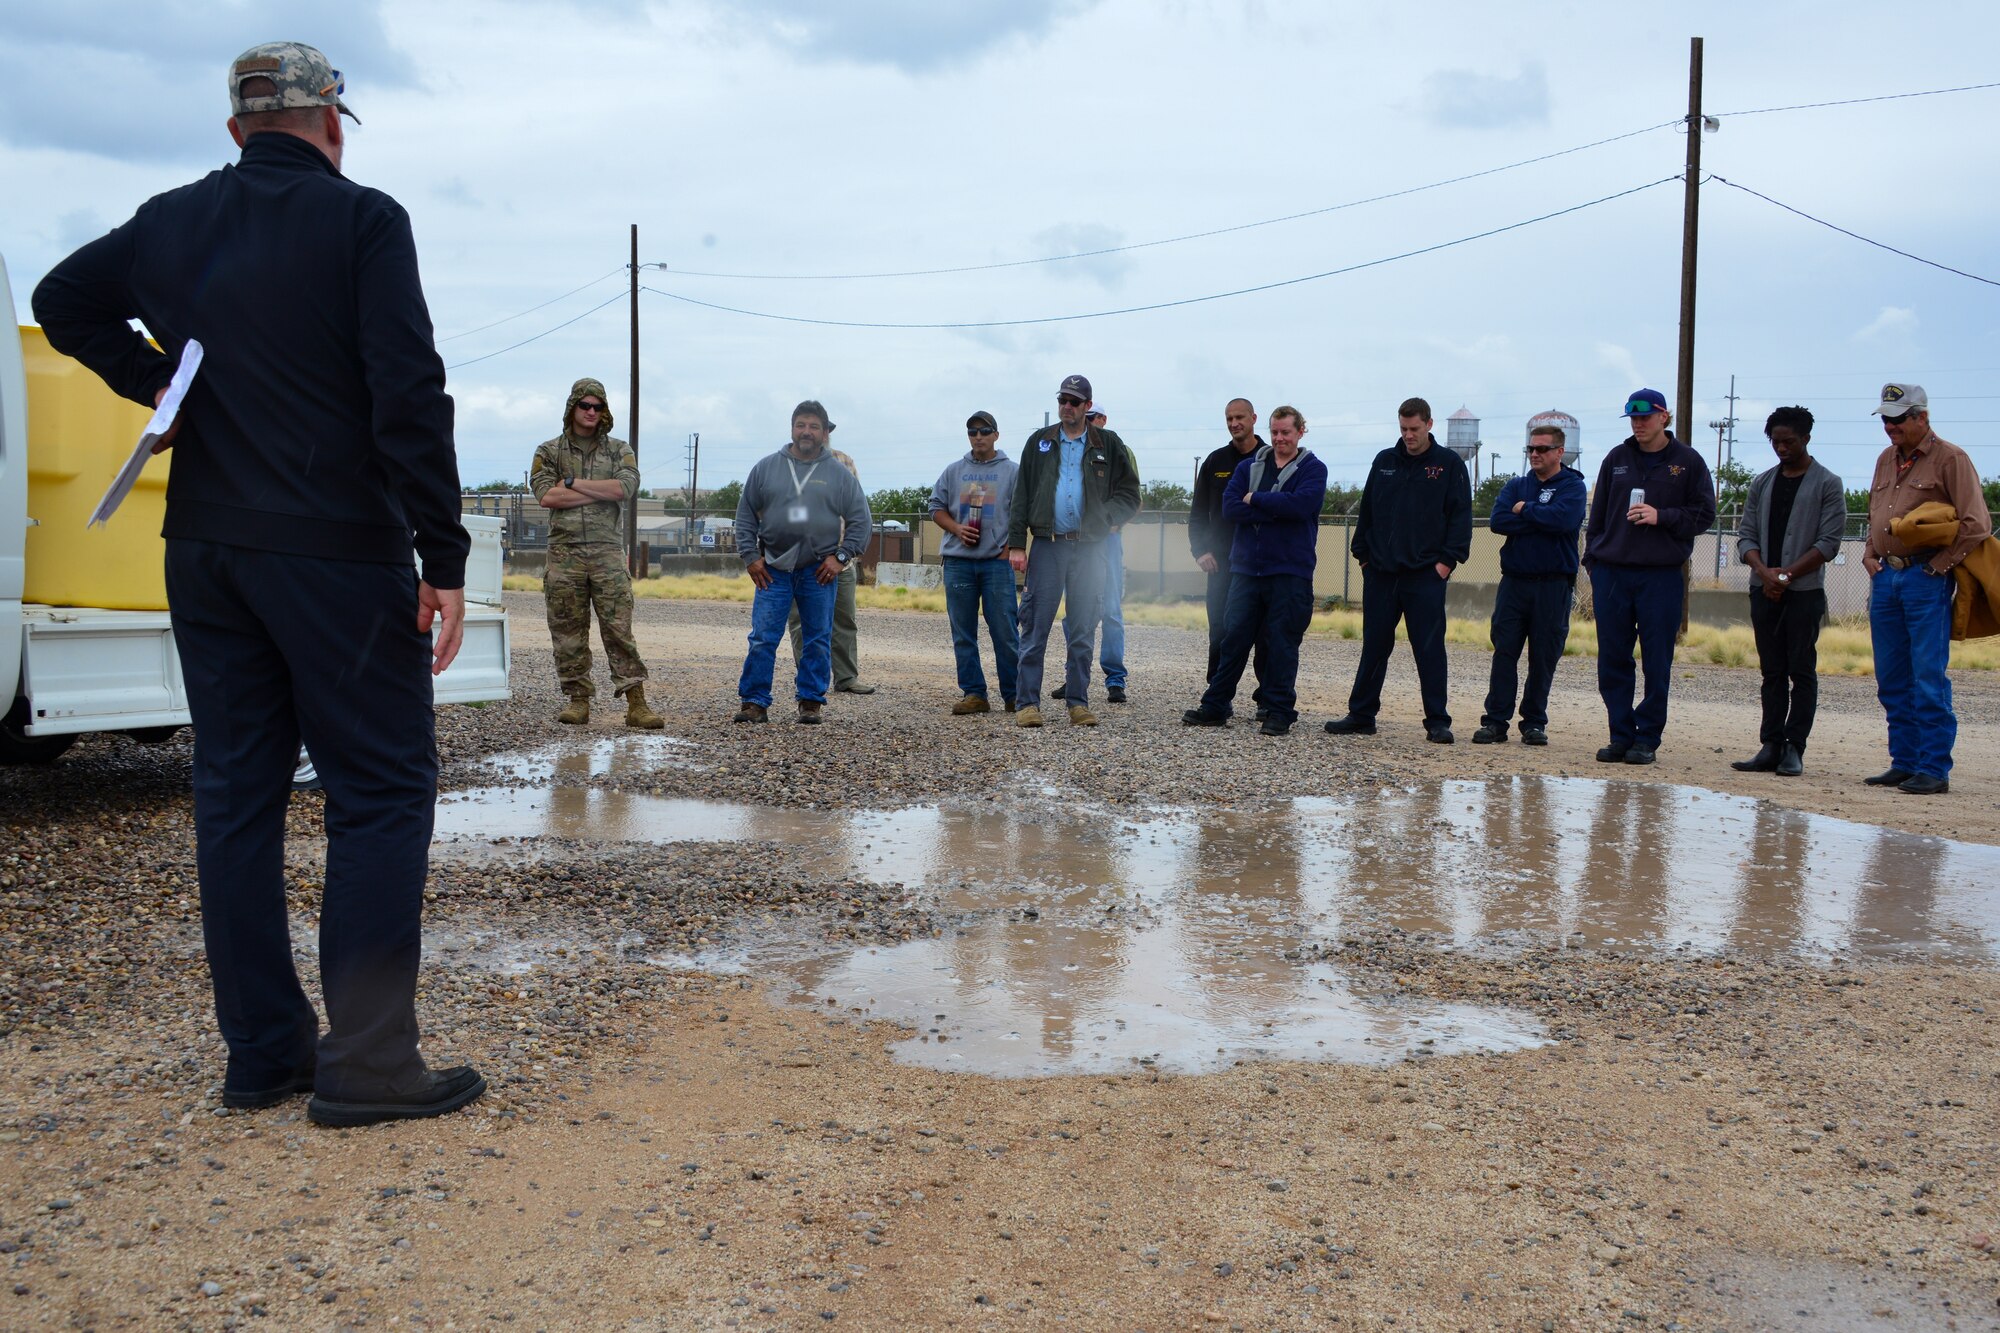 Man demonstrates what a 55 gallon spill looks like to a small group of people at Kirtland, AFB.